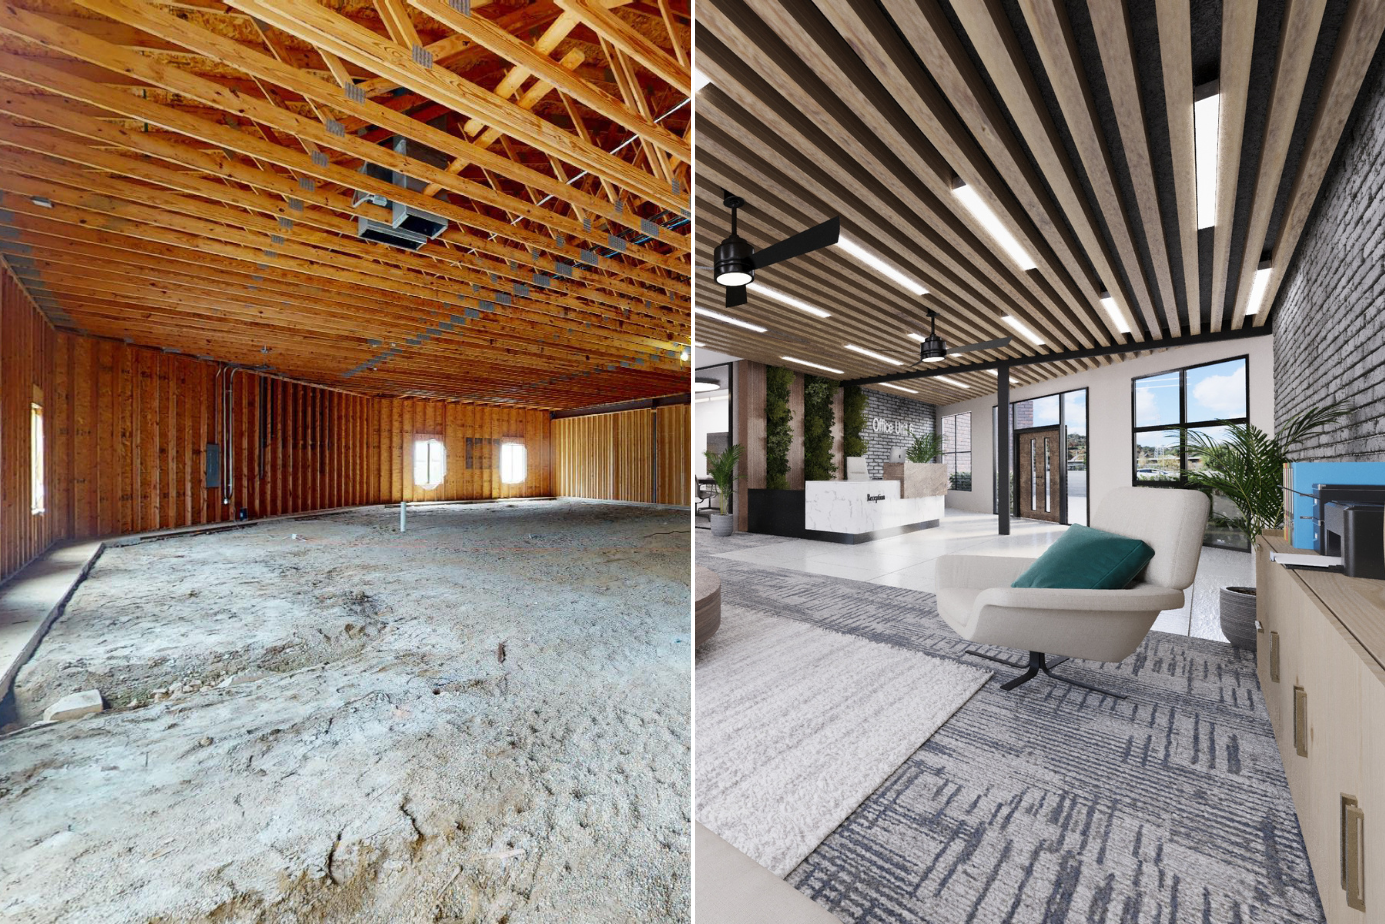 Commercial Virtual Remodeling by Square Foot Productions, split image shows a shell space transformed into an office space